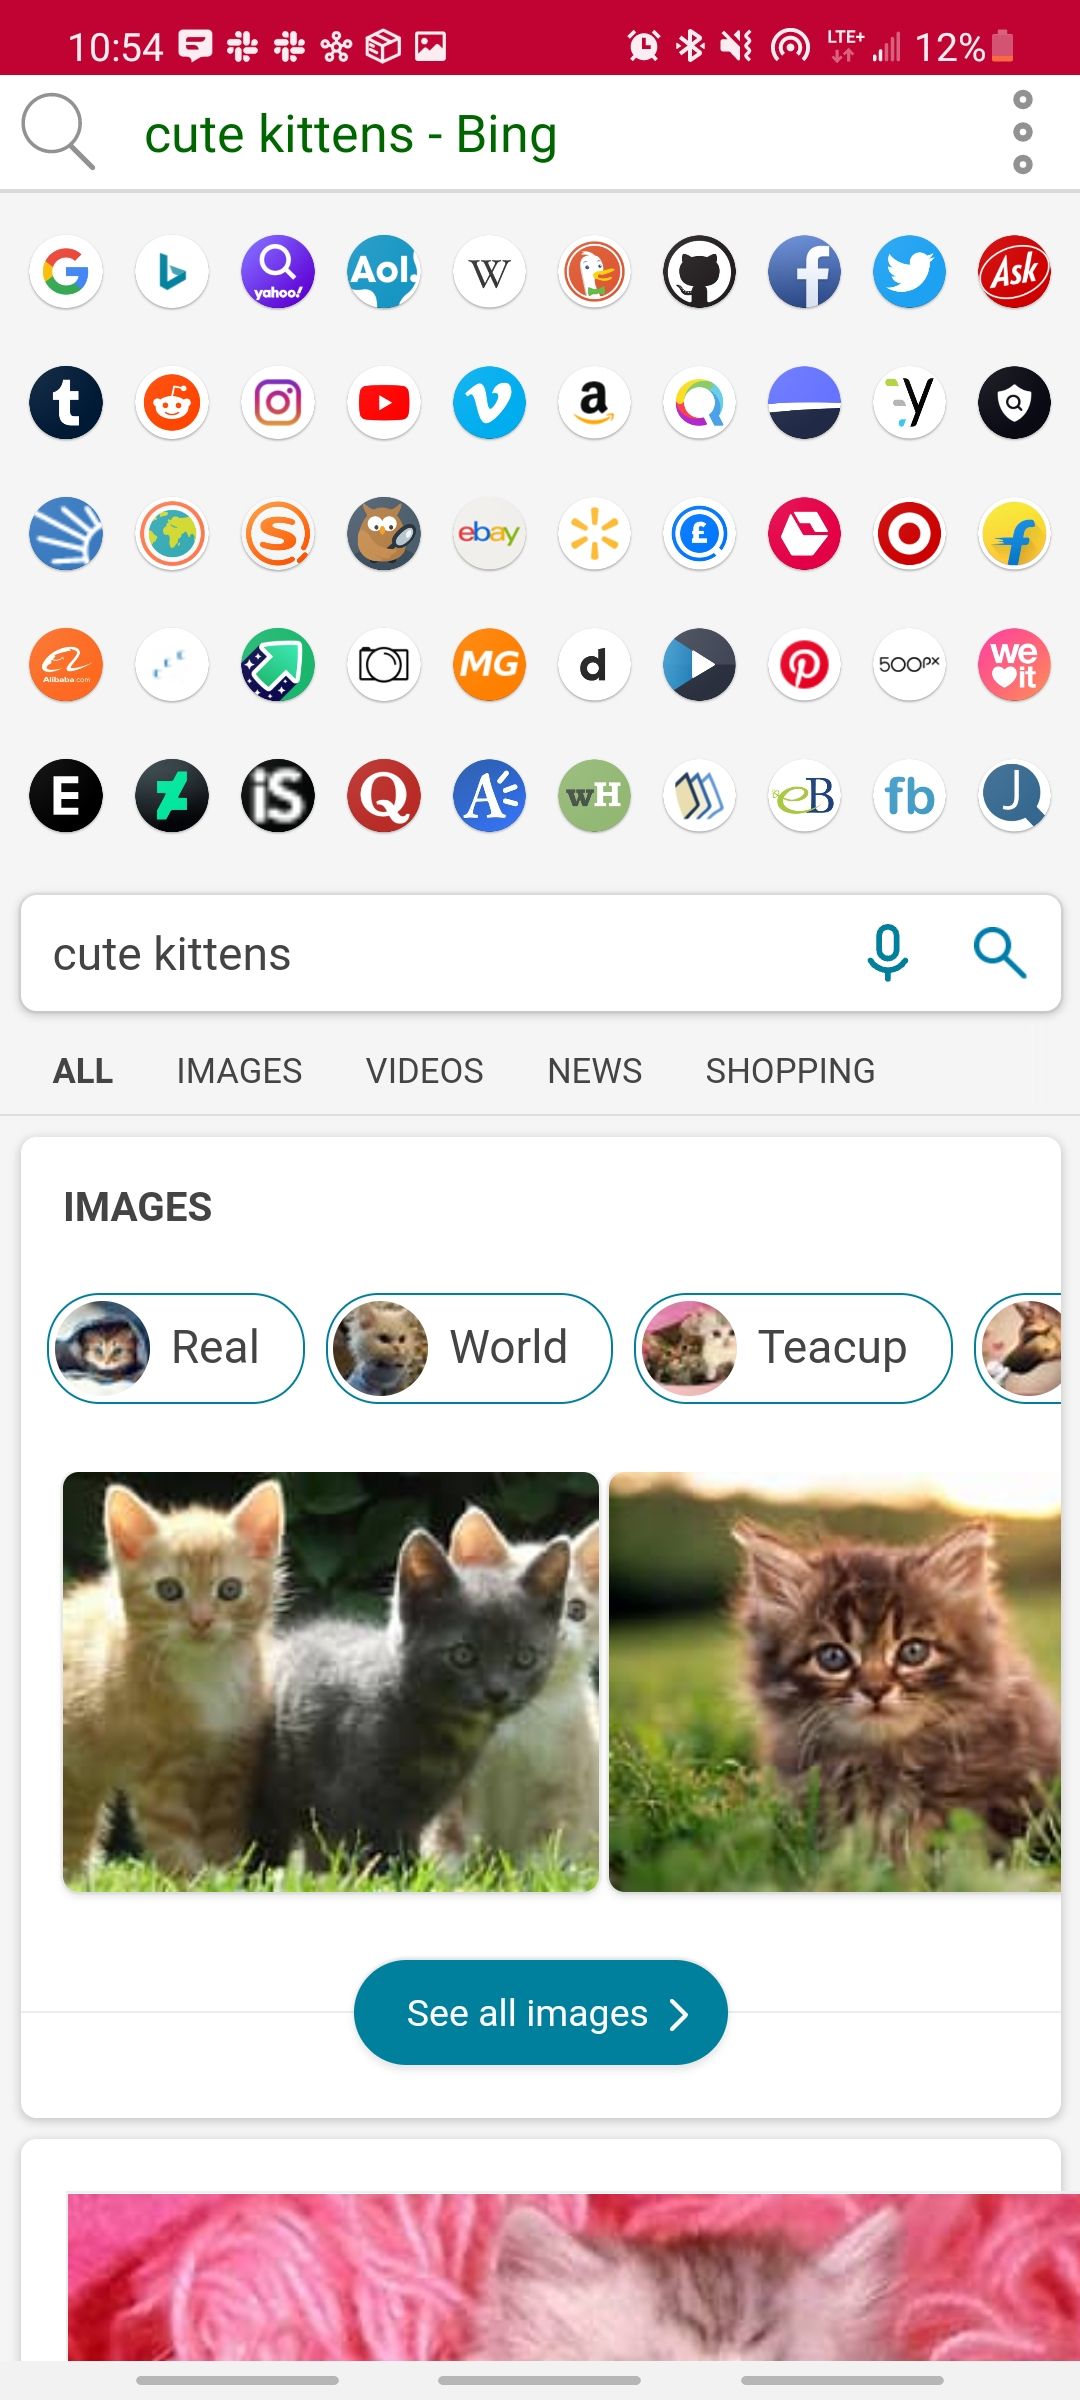 search it app showing cute kittens bing search and all other available search engines